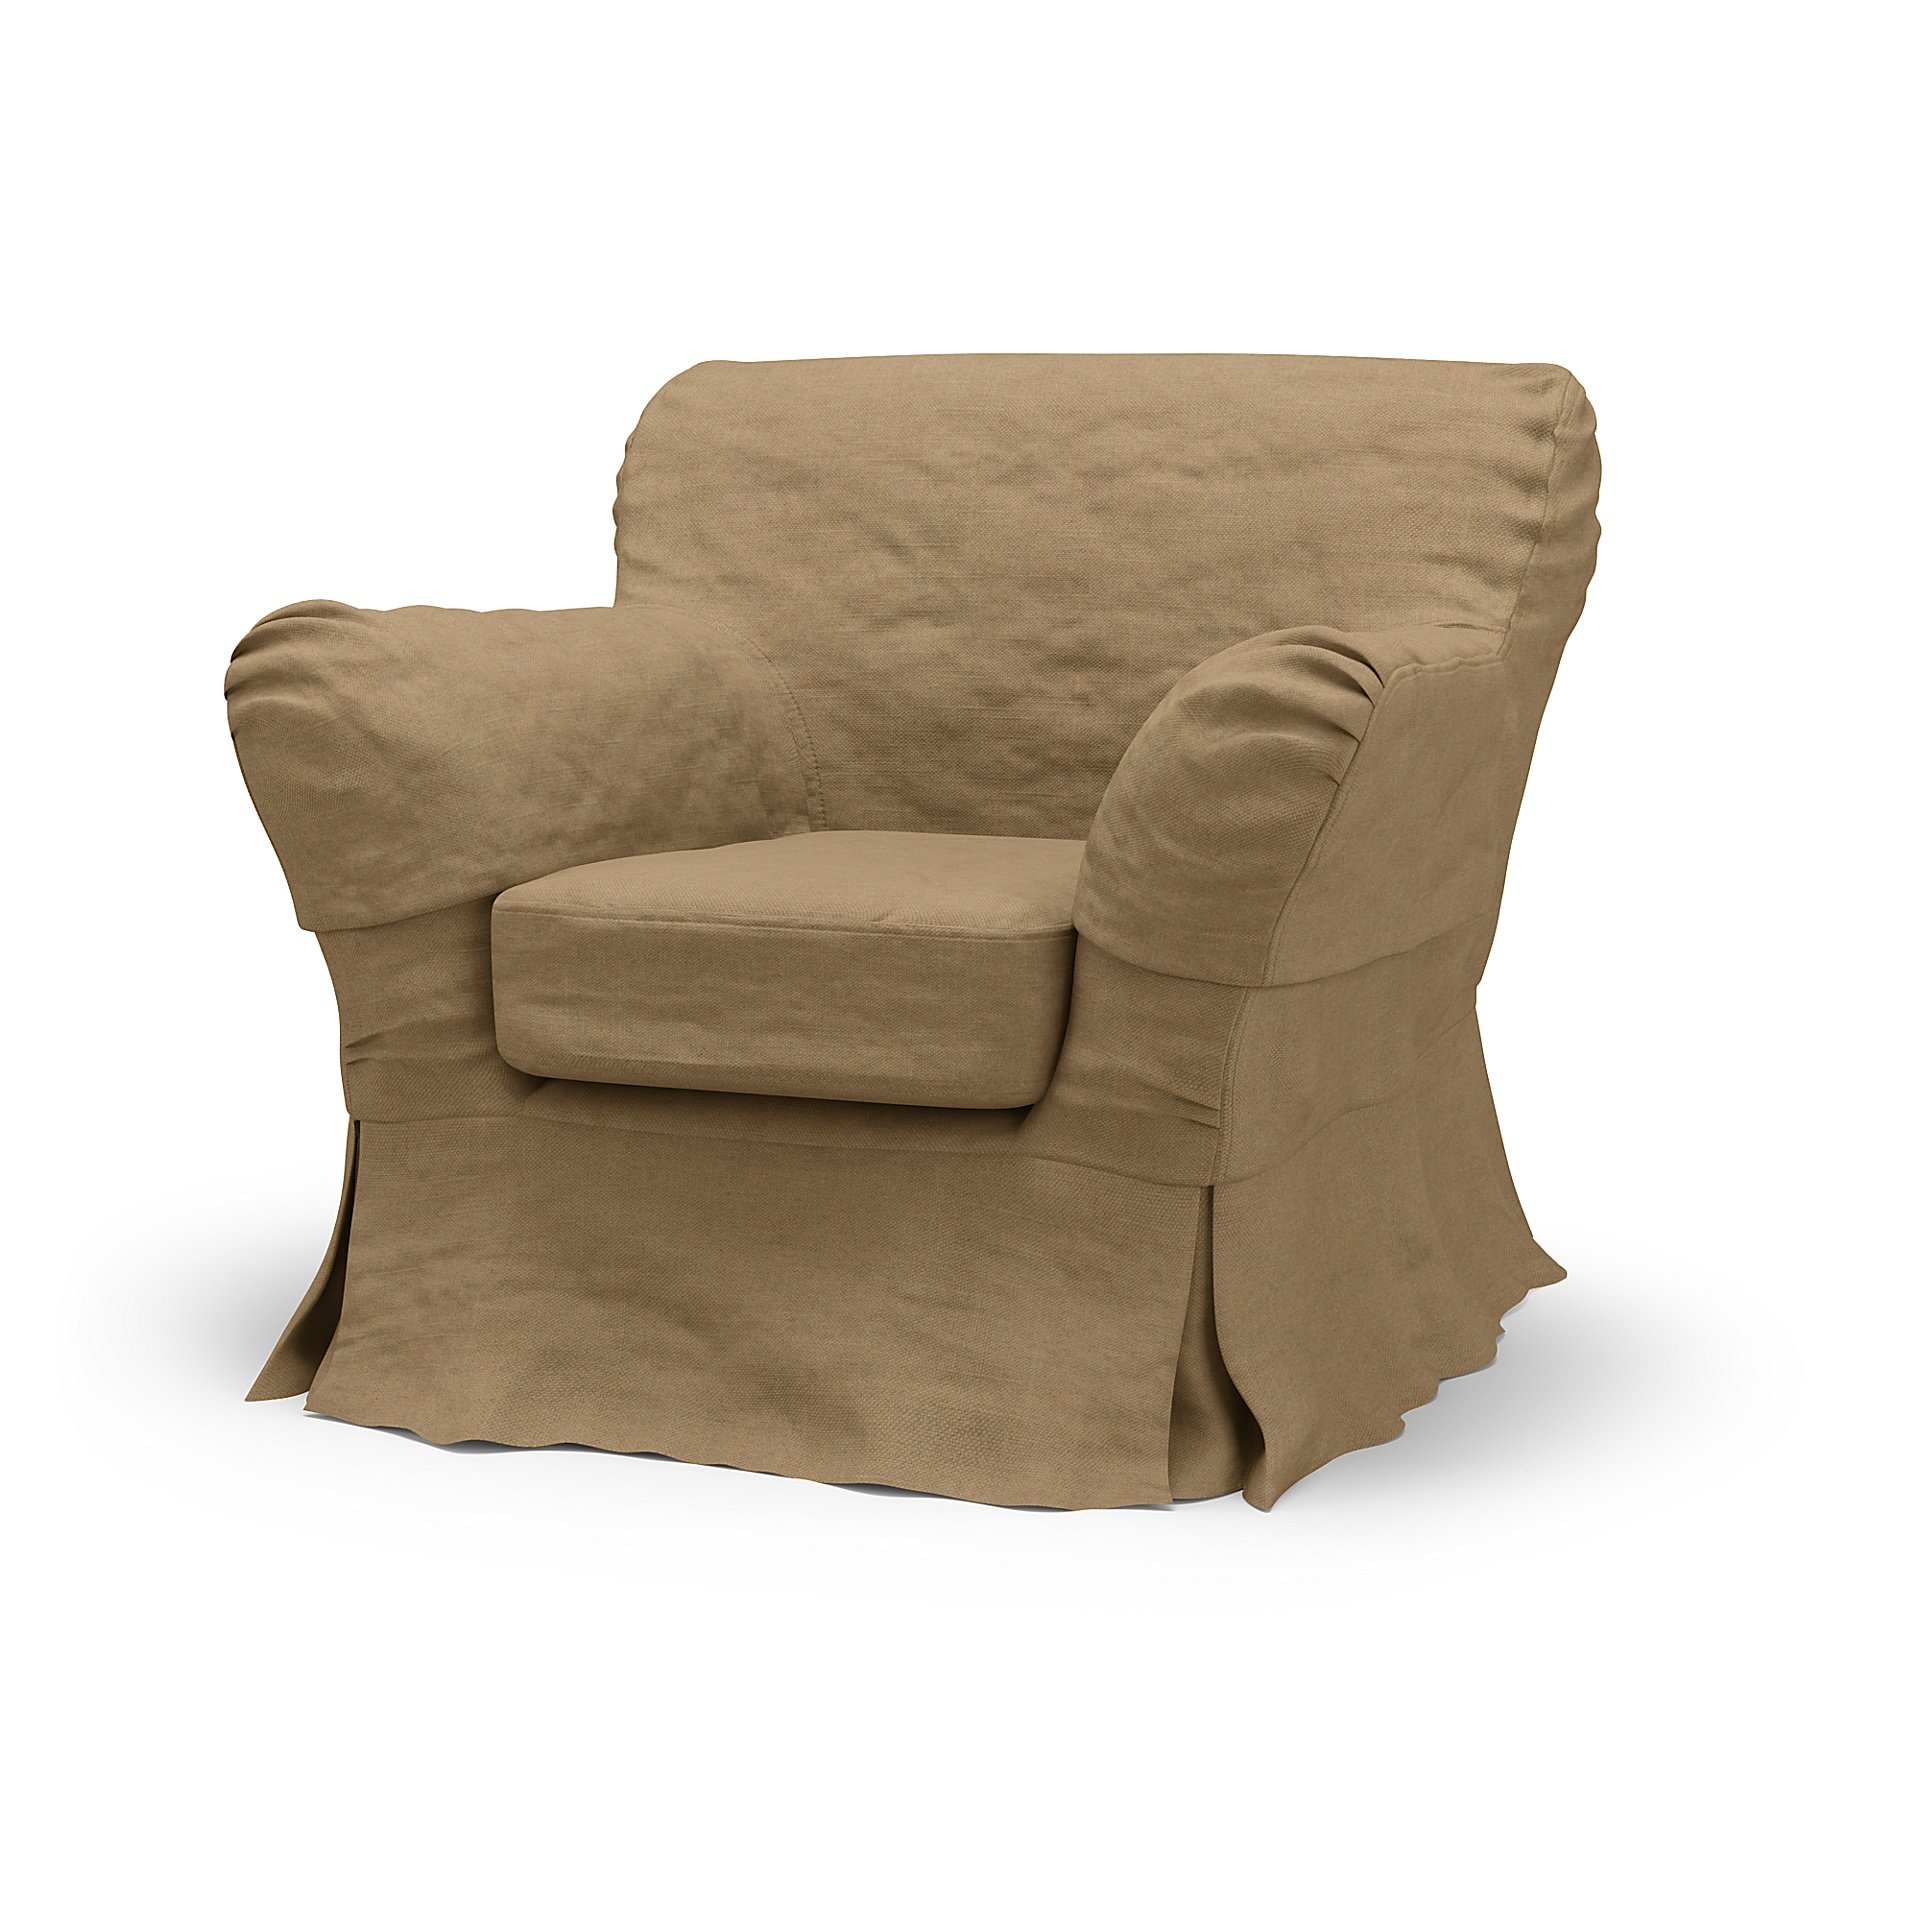 IKEA - Tomelilla Low Back Armchair Cover (Large), Sand, Wool - Bemz